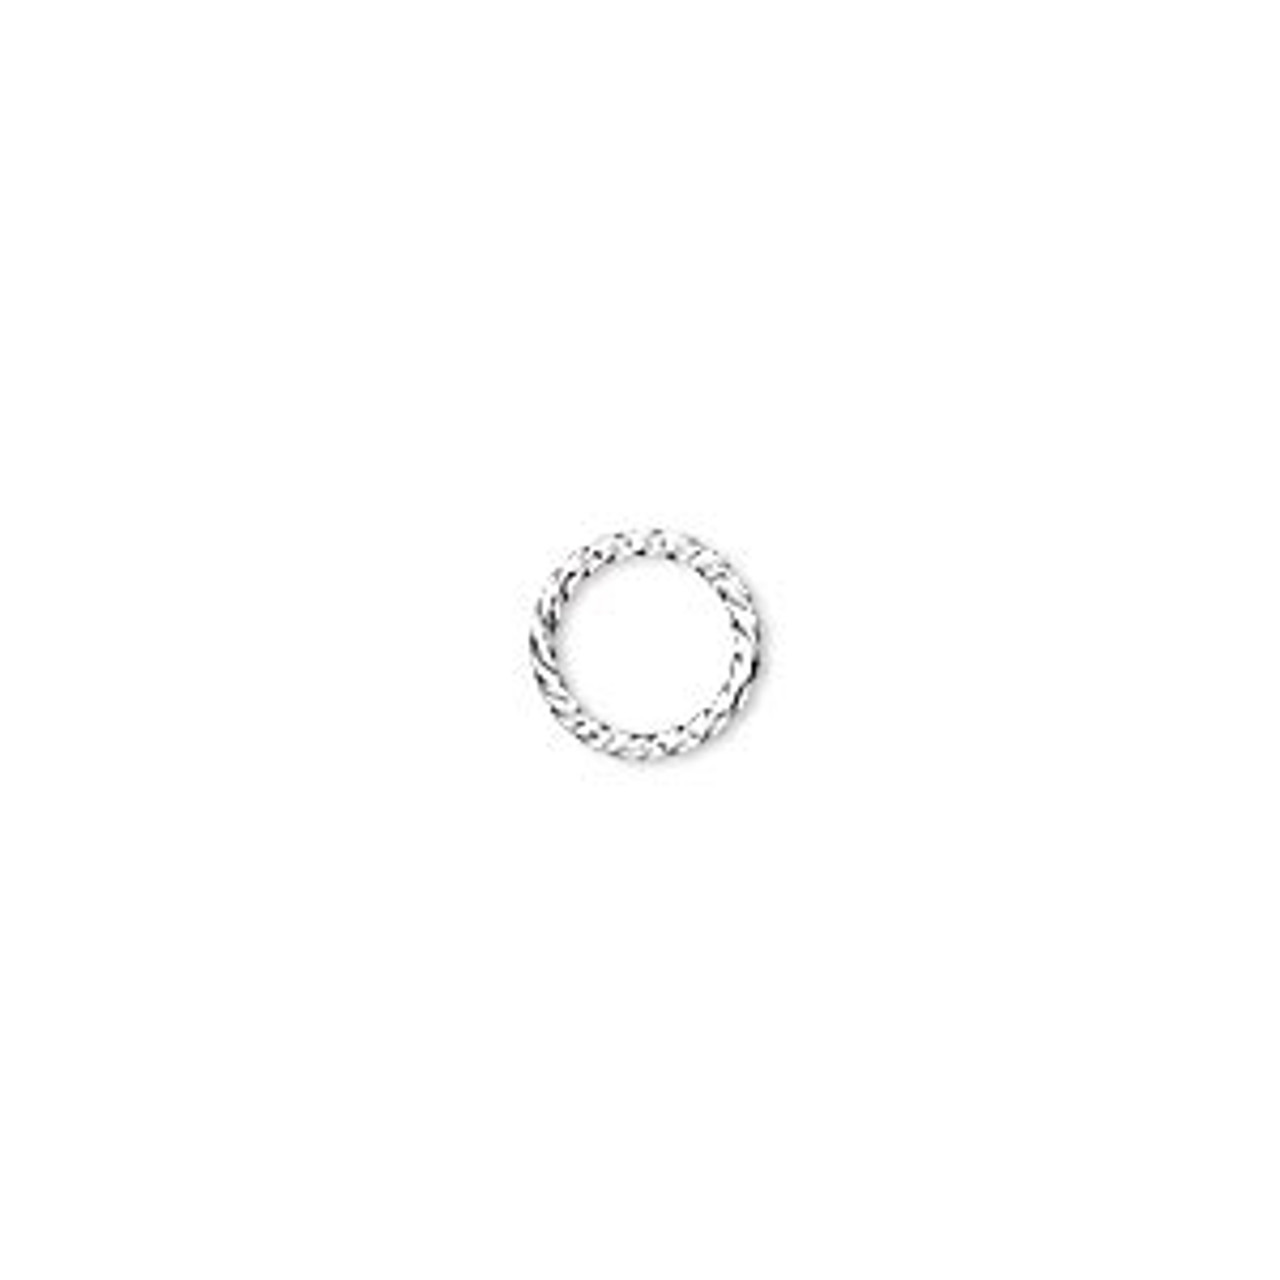 8mm Silver Plated Twisted Jump Ring (20 Ct.)